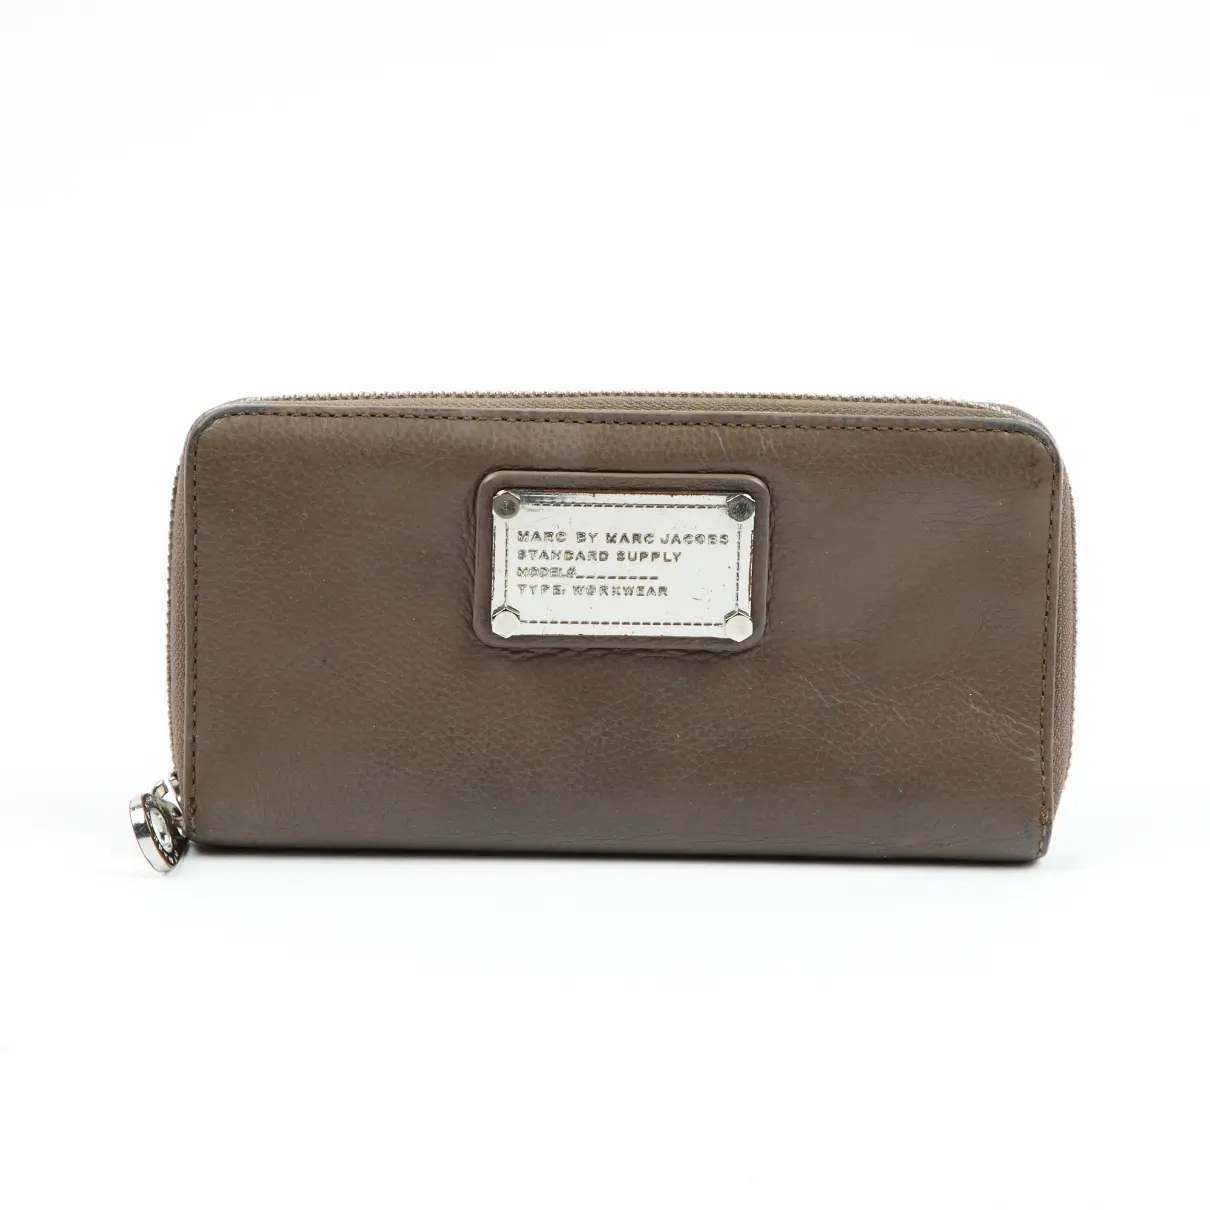 Marc Jacobs Leather wallet for sale